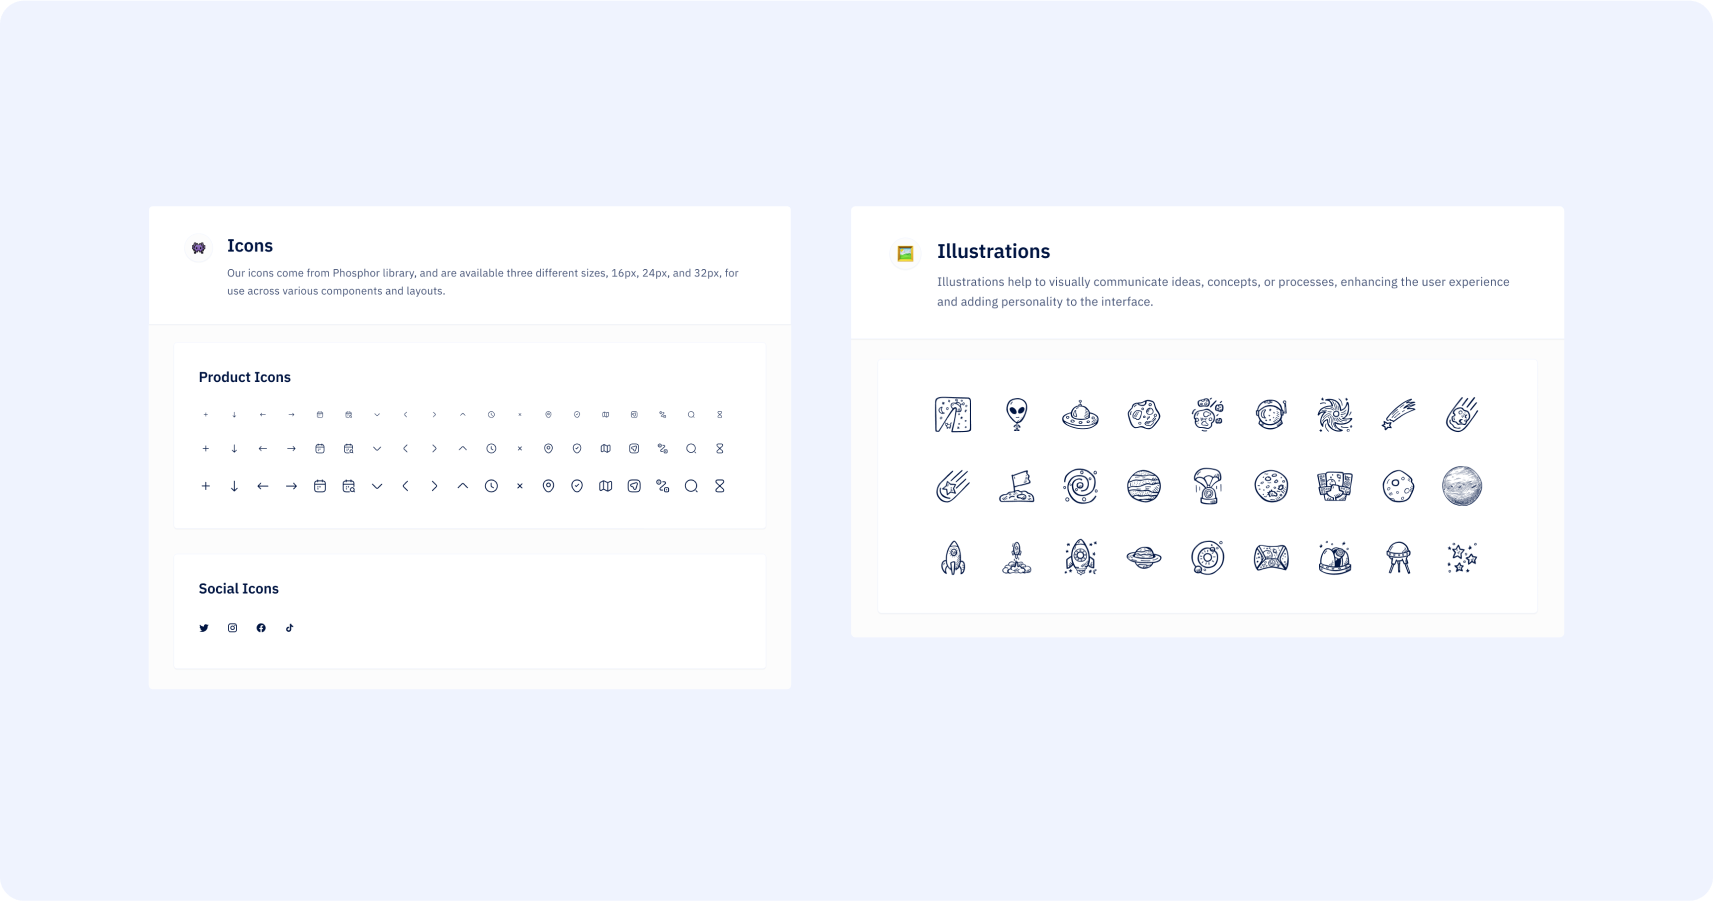 Snapshots of the final version of the Design System, showcasing the completed icon set and illustration library